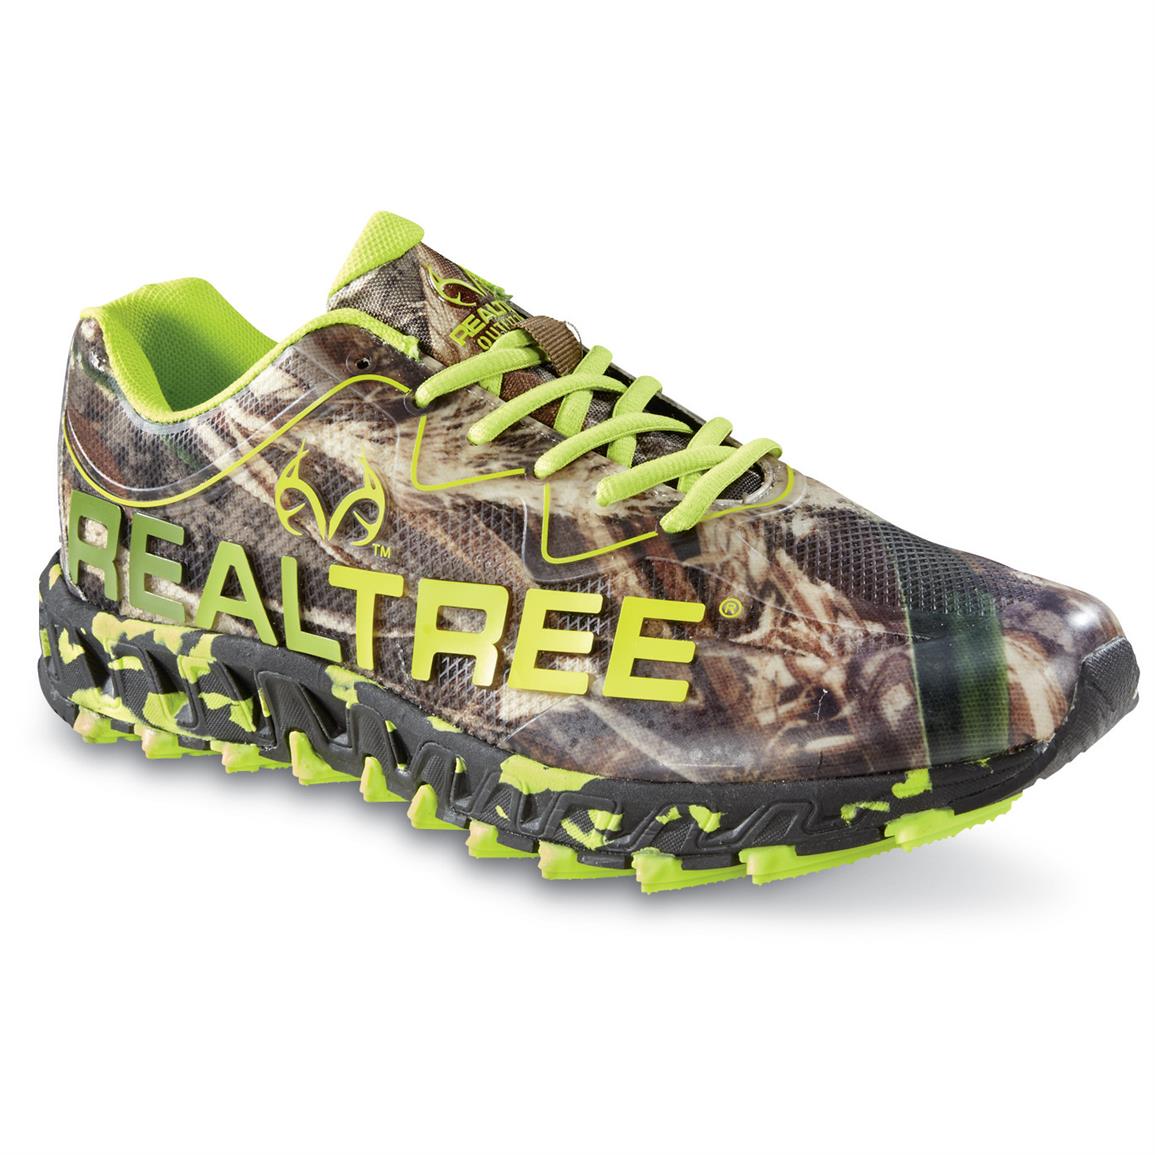 Realtree Outfitters Men's Panther Hiking Shoes RM514322 Camo/Lime/Max5 